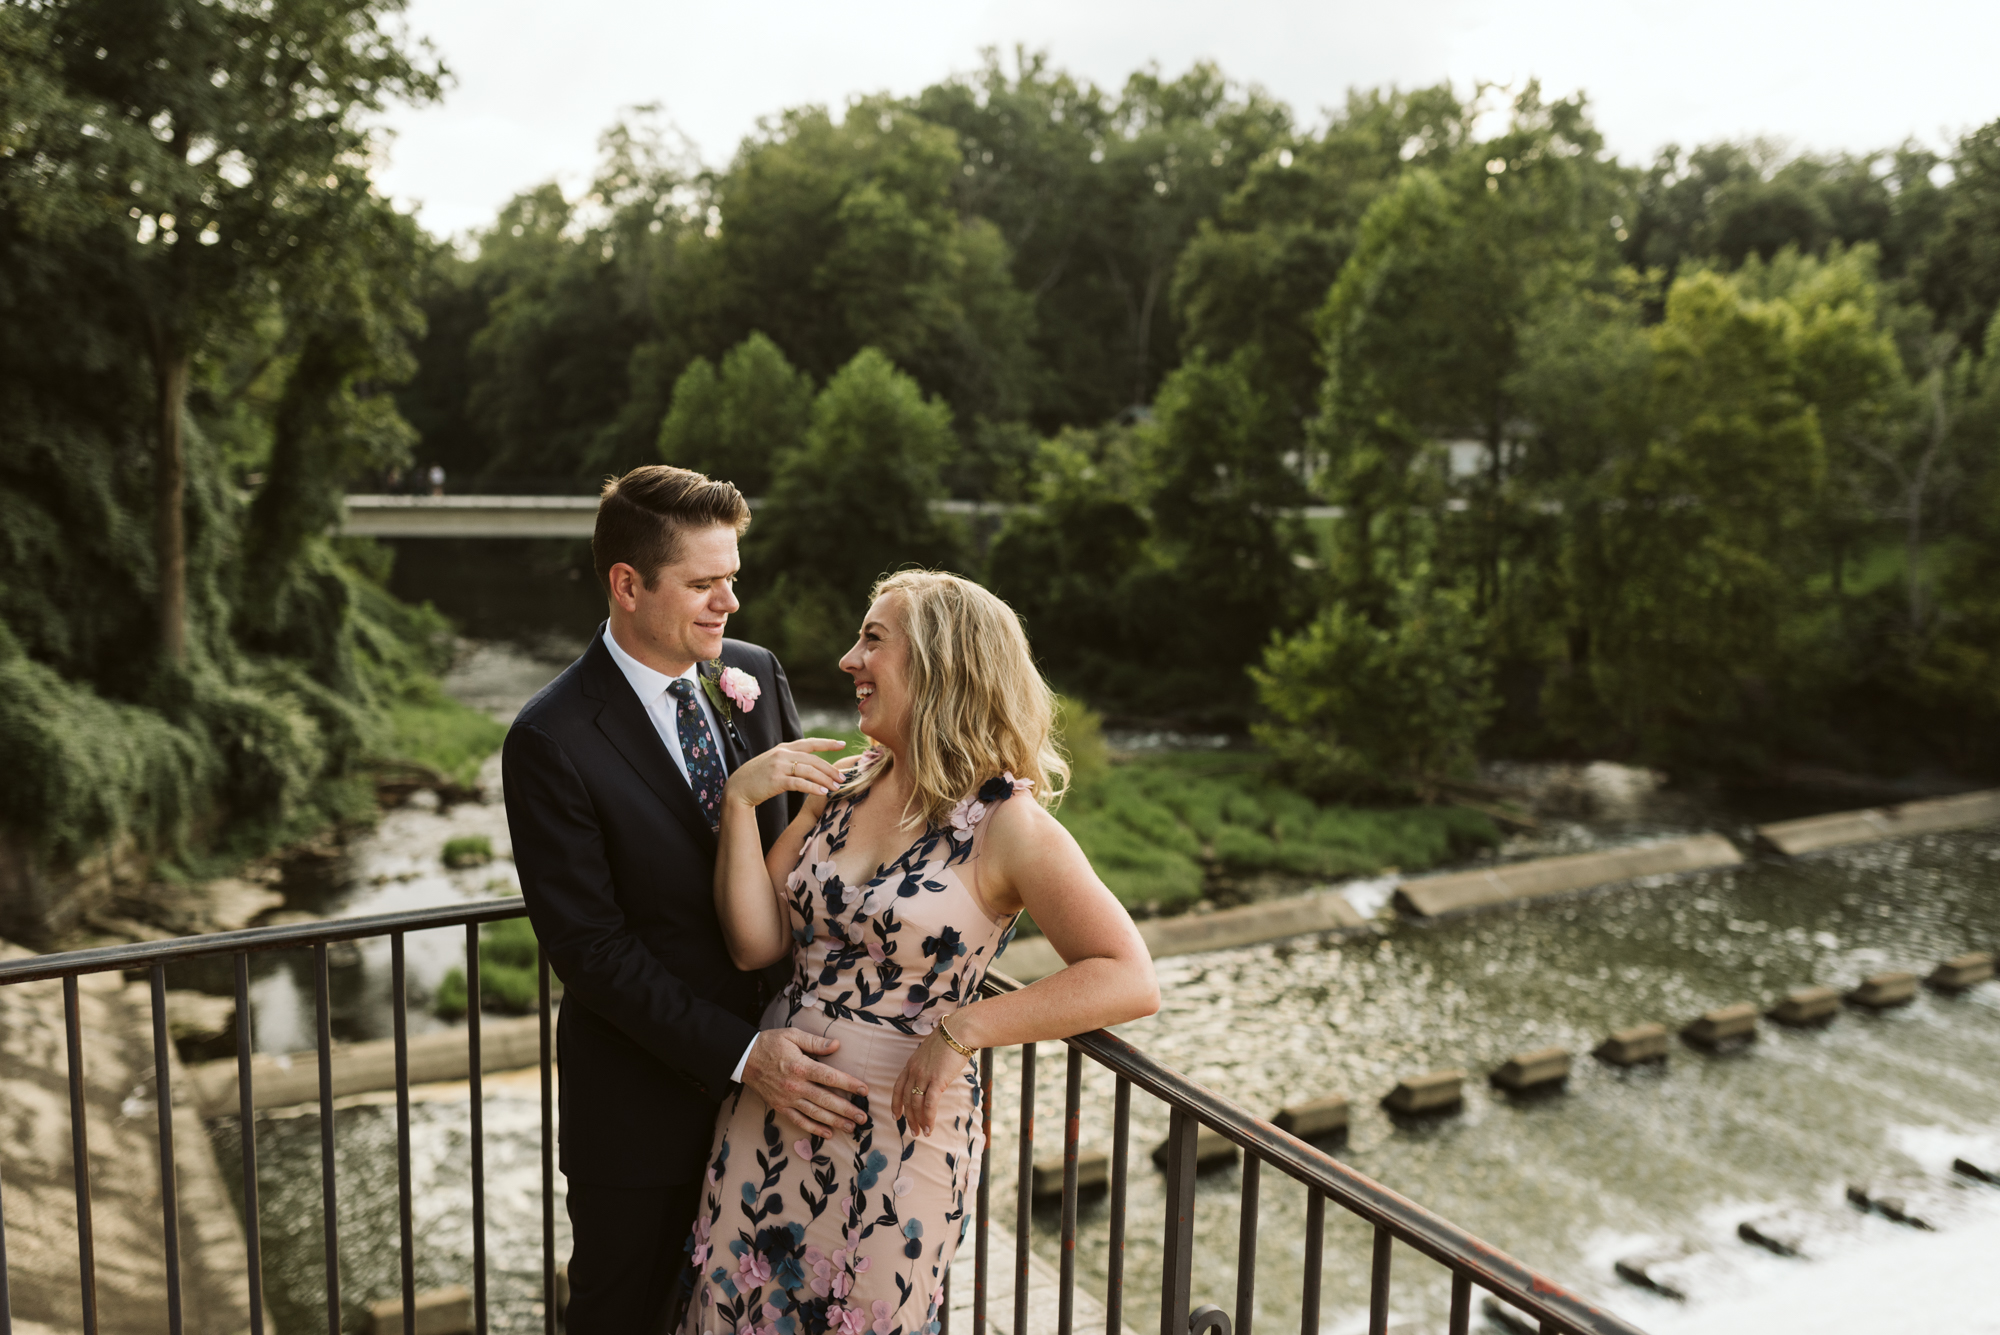 Pop-up Ceremony, Outdoor Wedding, Casual, Simple, Lake Roland, Baltimore, Maryland Wedding Photographer, Laid Back, Bride and Groom Leaning on Bridge, Bonobos Tie